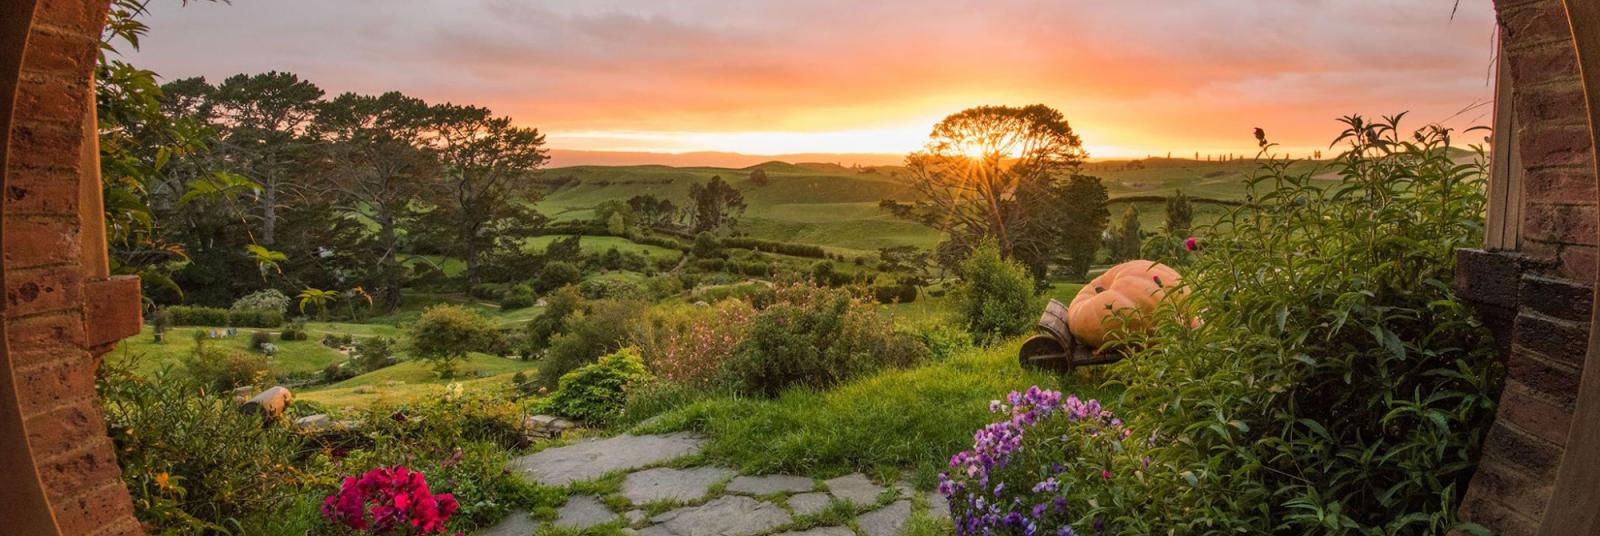 The encapulating view over middle-earth as seen from Hobbiton.